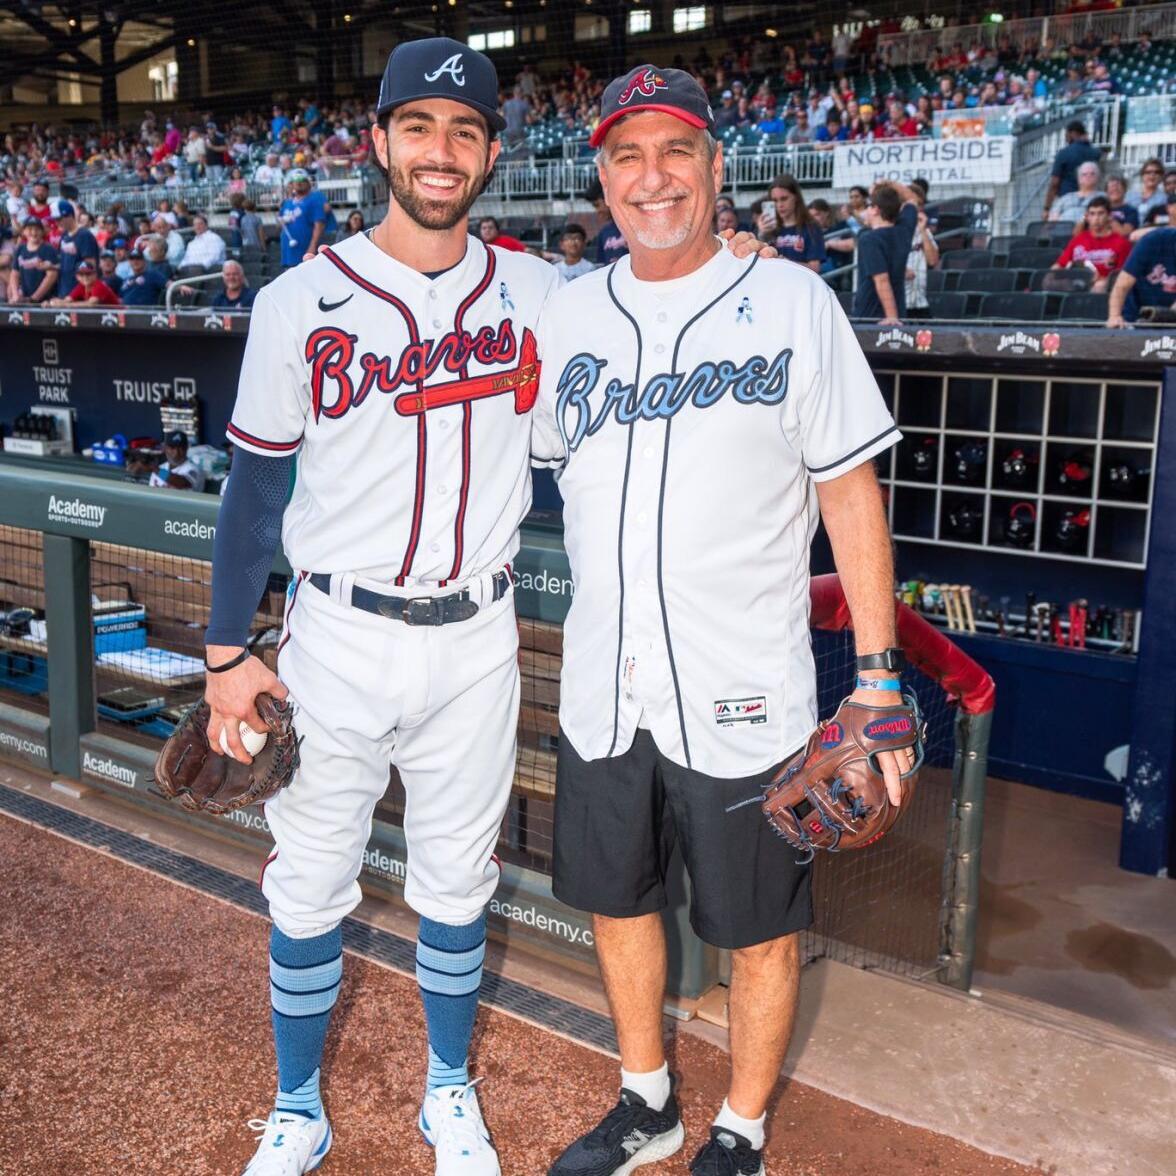 Cooter Swanson tells hometown hero Dansby: Just go do you', Atlantabraves